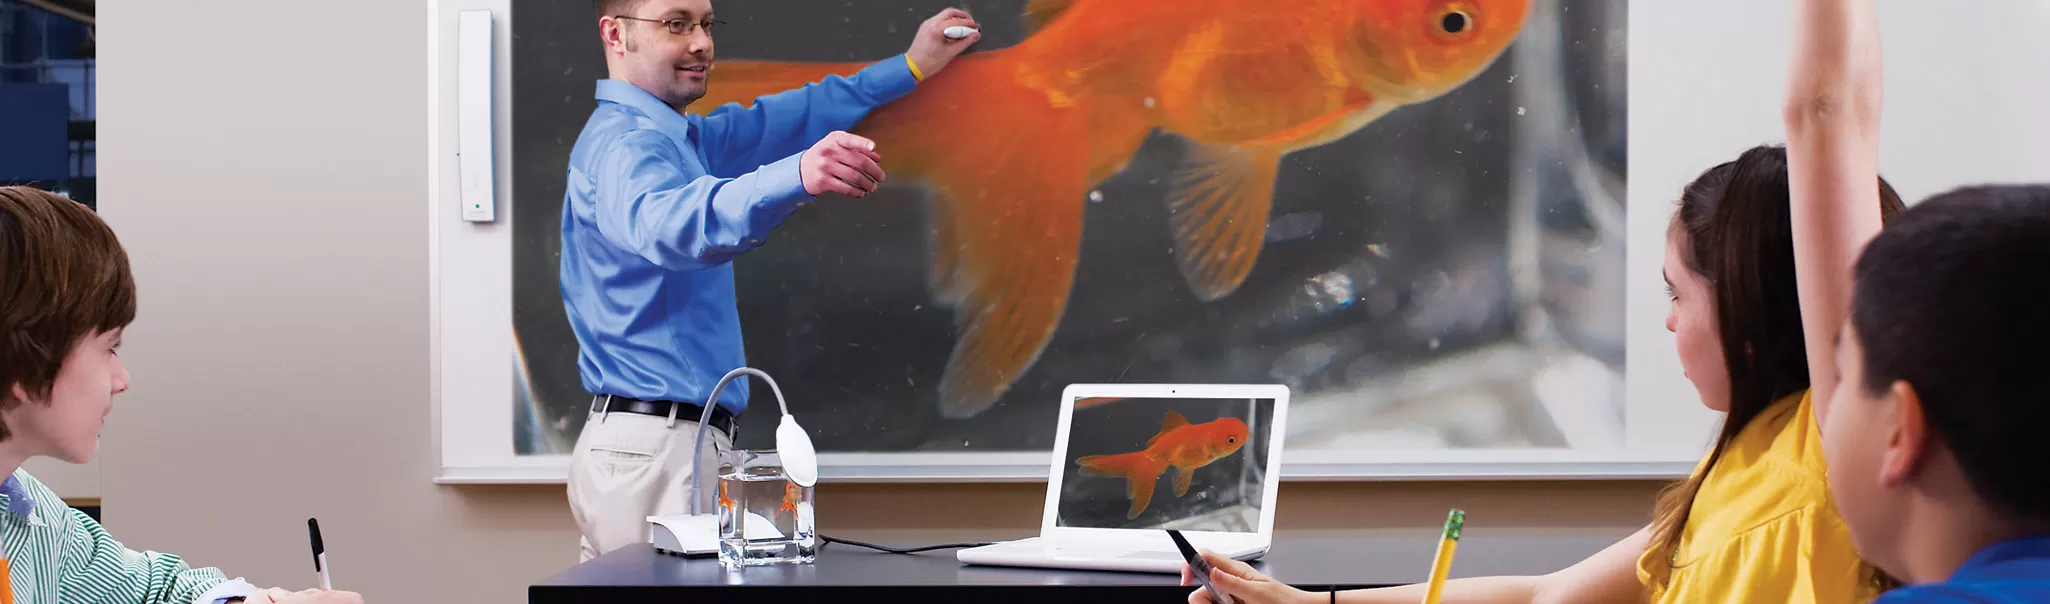 MimioView 350U Document Camera being used to film a goldfish in a jar and project onto a MimioTeach whiteboard